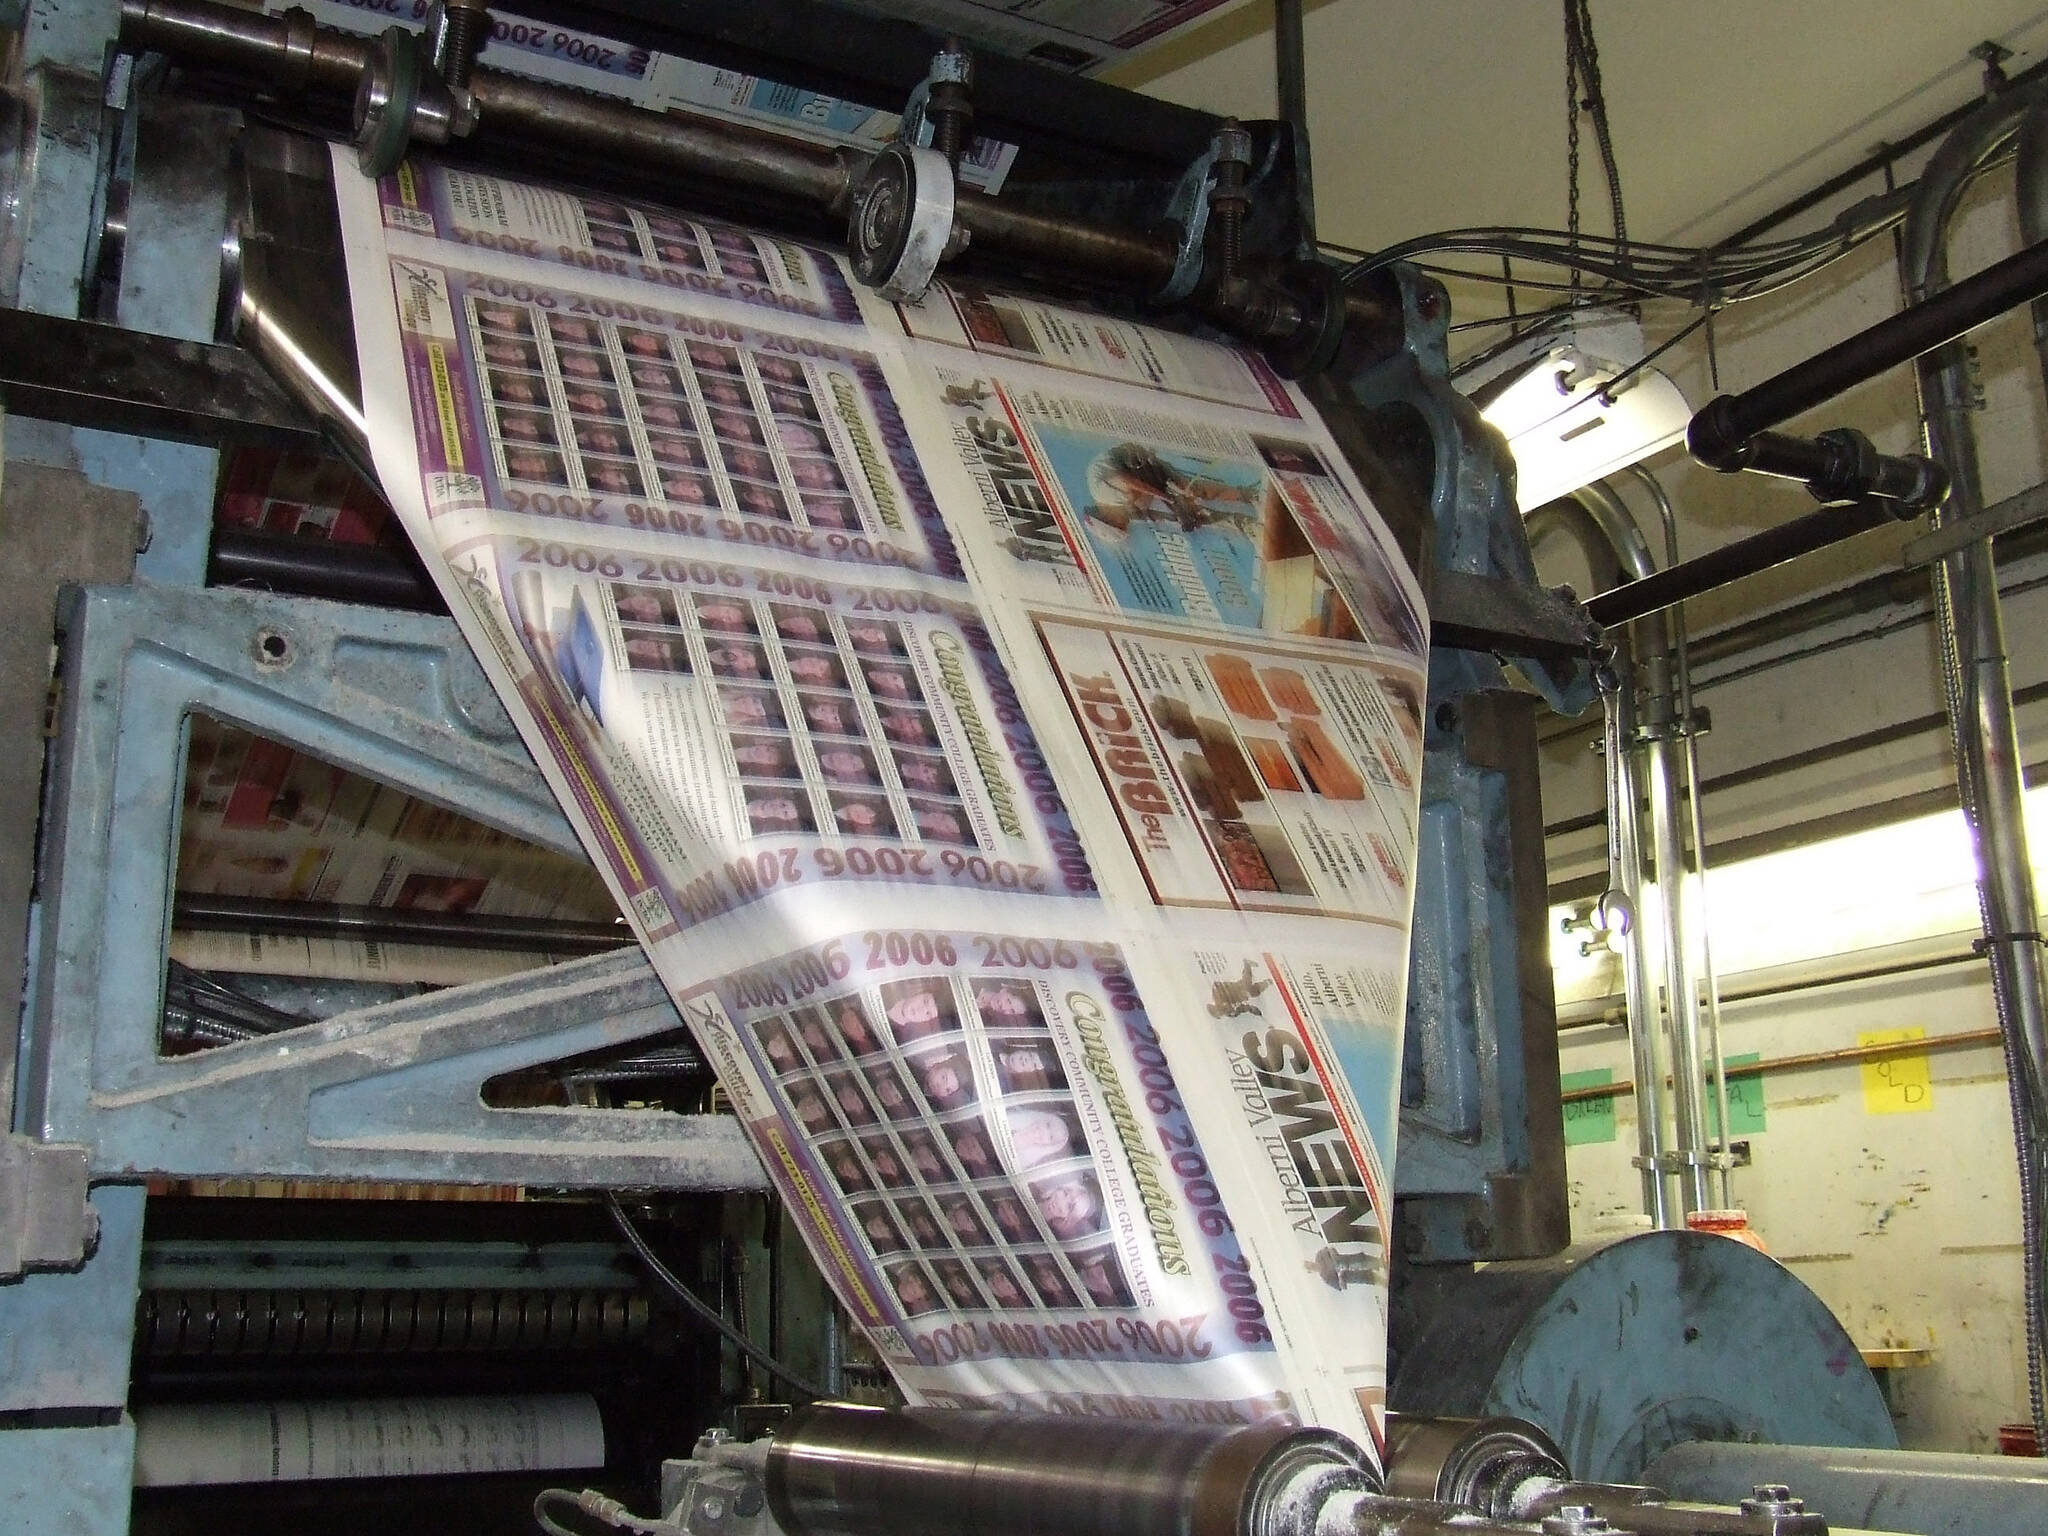 The first edition of the Alberni Valley News rolls through the press at the Black Press printing plant in Ladysmith. The development of the printing press has helped in the spread of books and other printed materials around the world. (Black Press file photo)